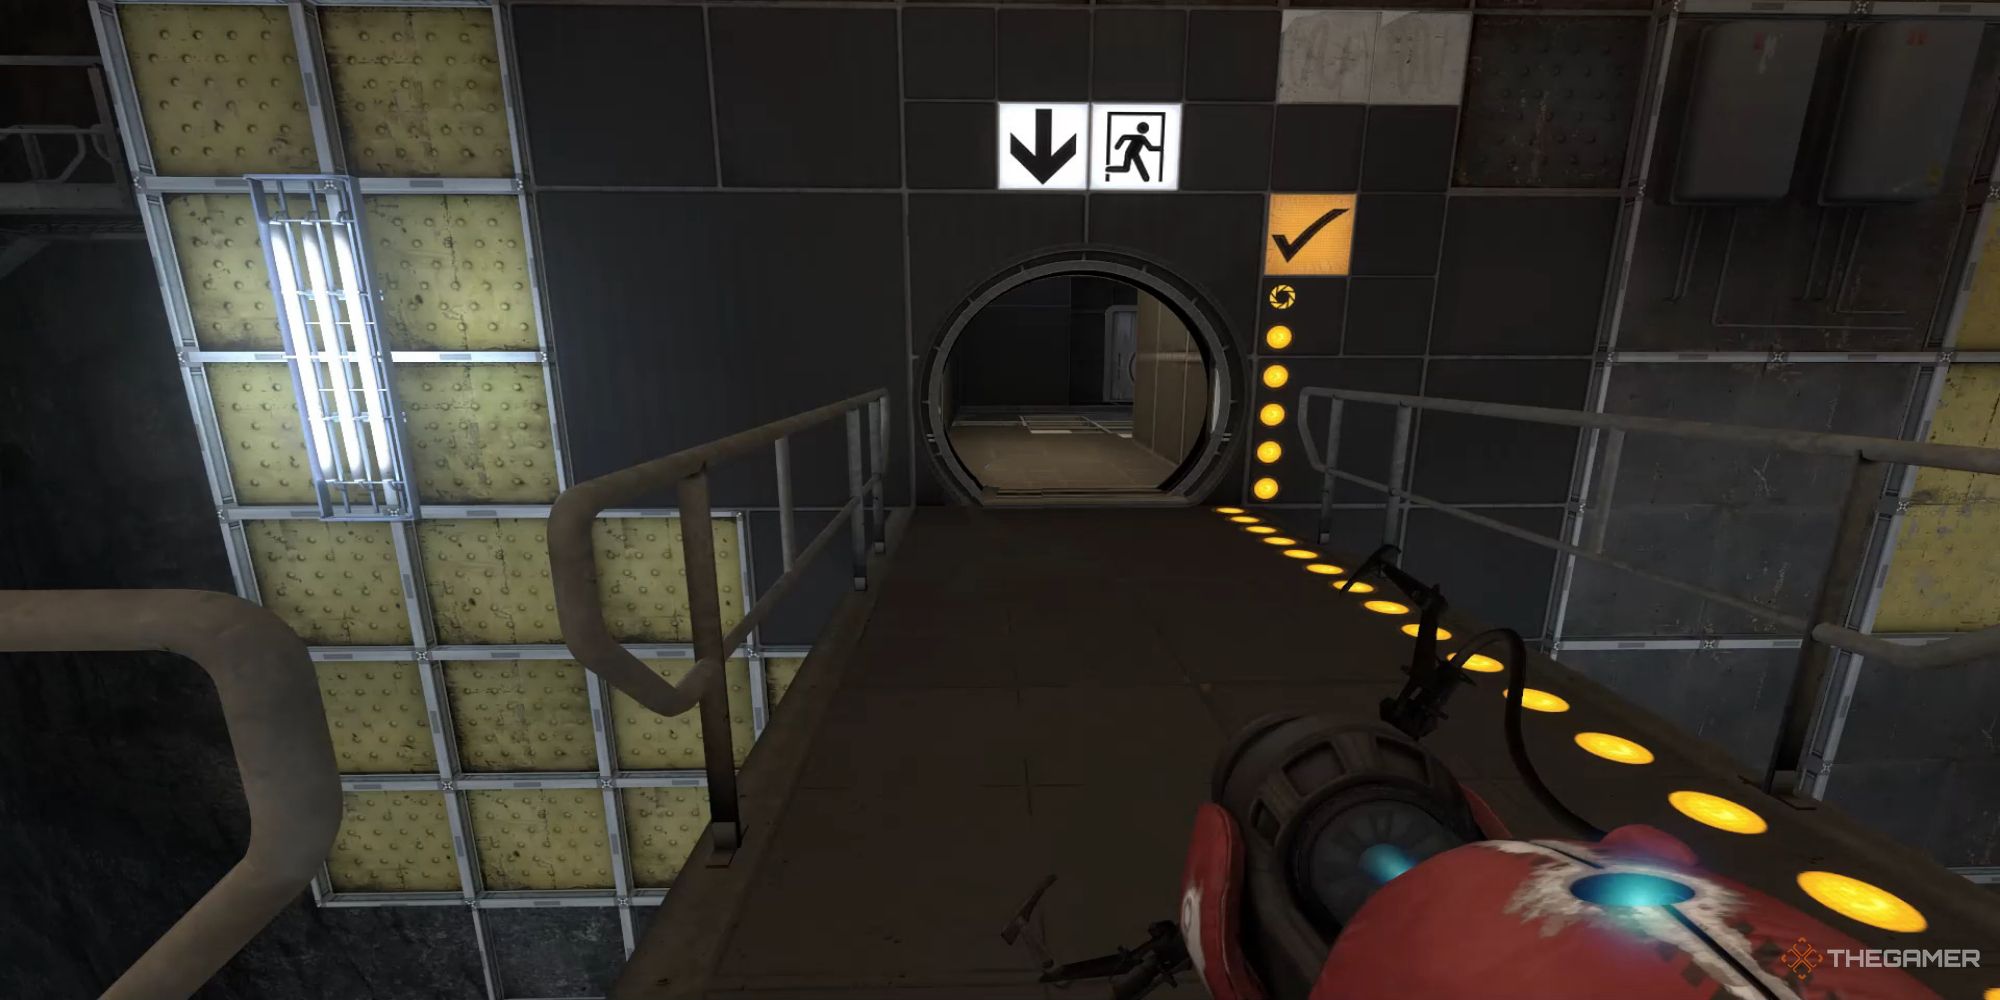 A screenshot from Portal Revolution showing the player character looking into an exit door that has been powered on